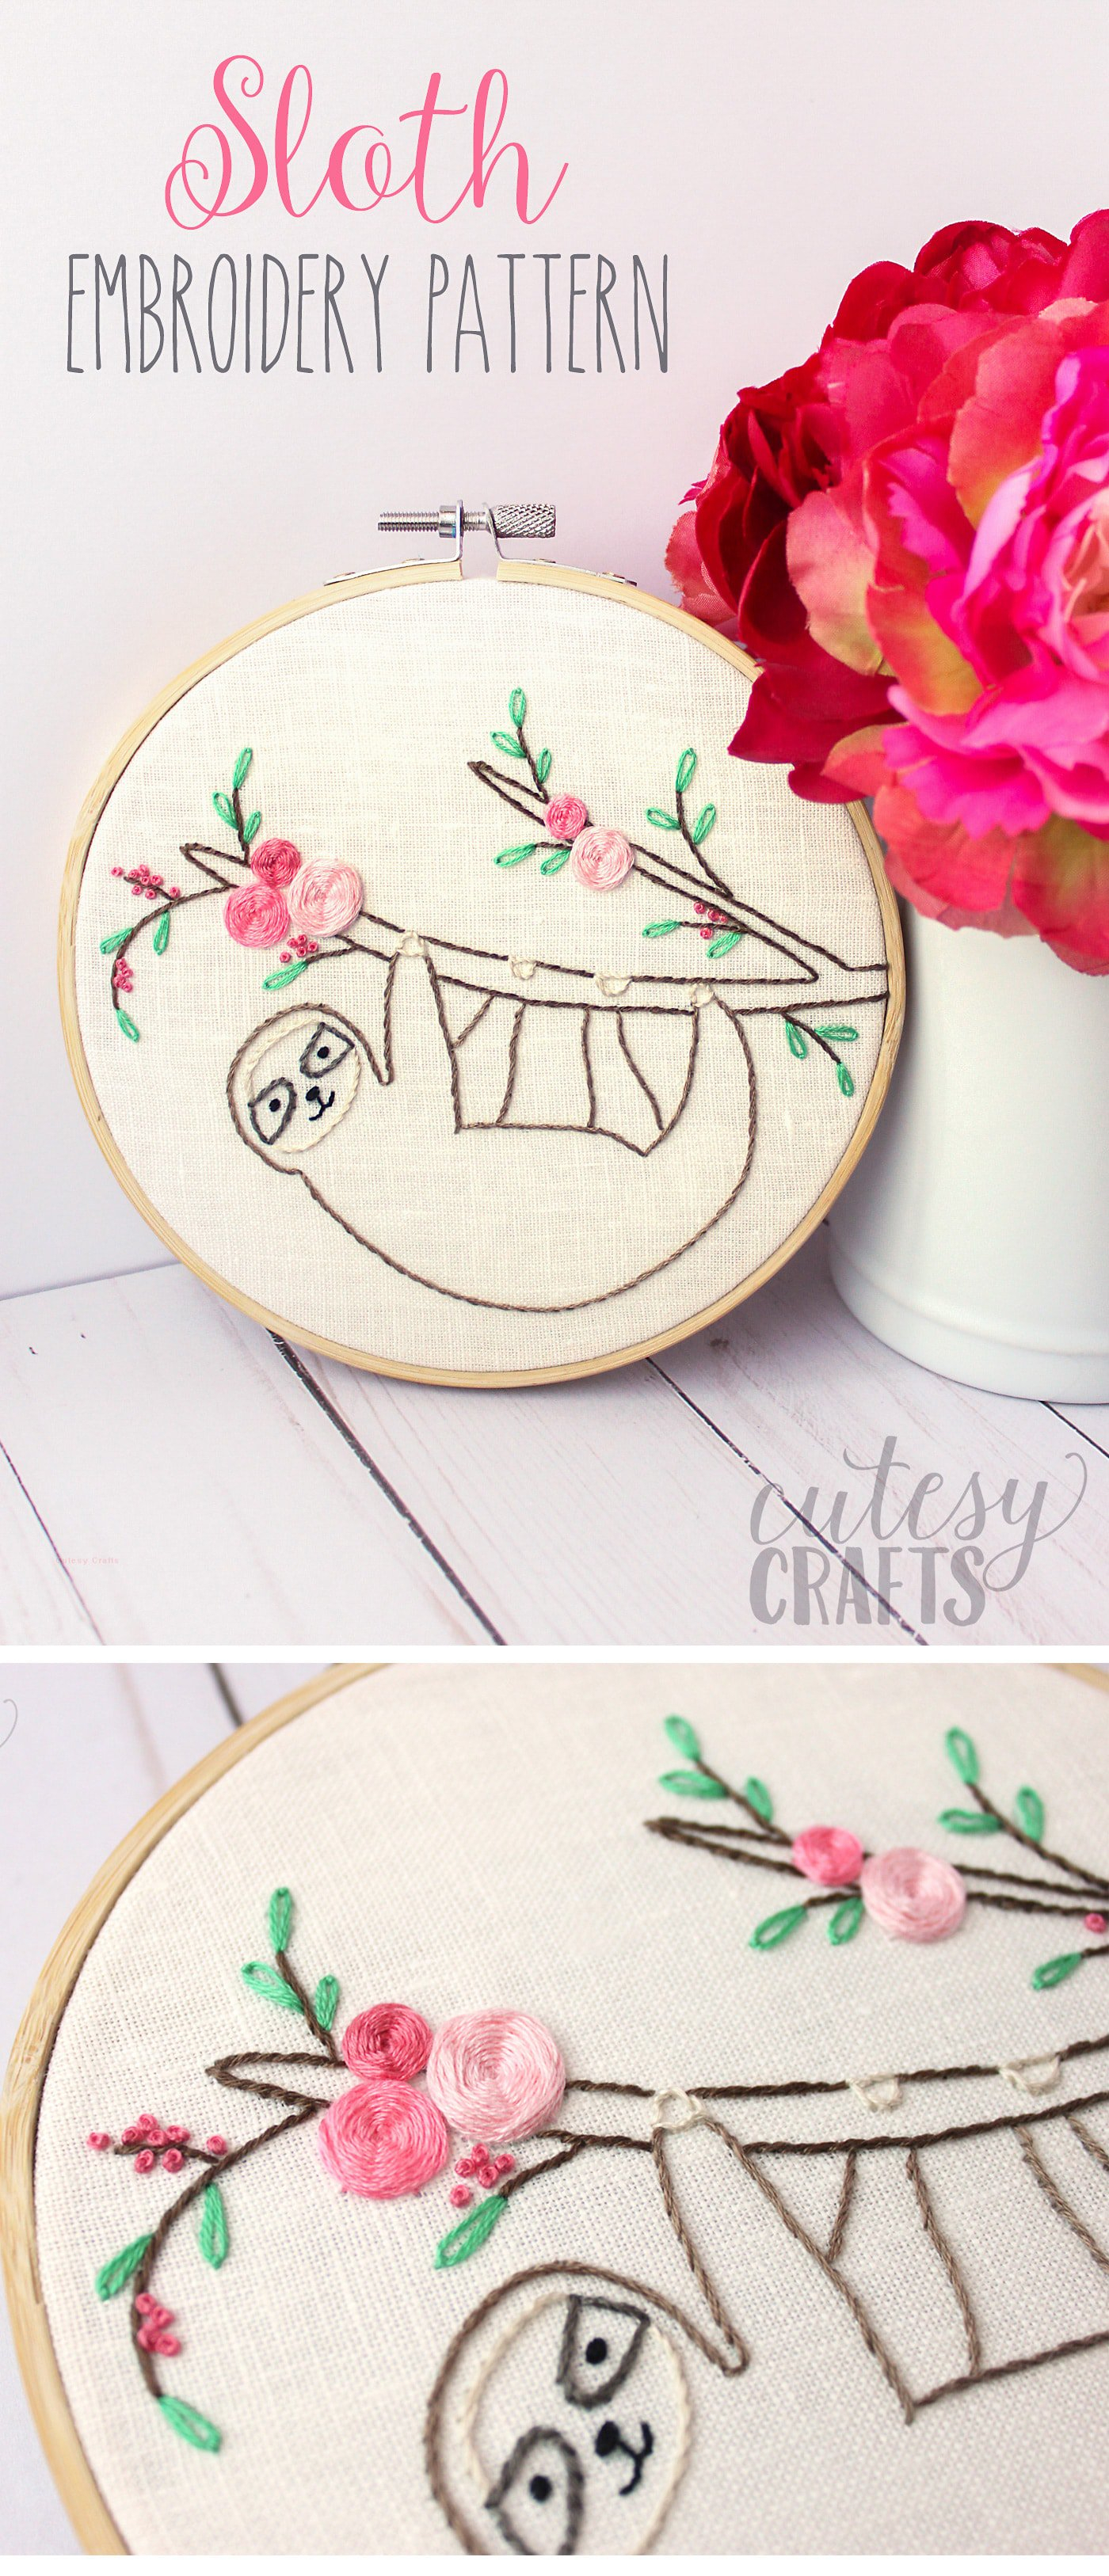 Free Embroidery Pattern Adorable Sloth Hand Embroidery Pattern The Polka Dot Chair